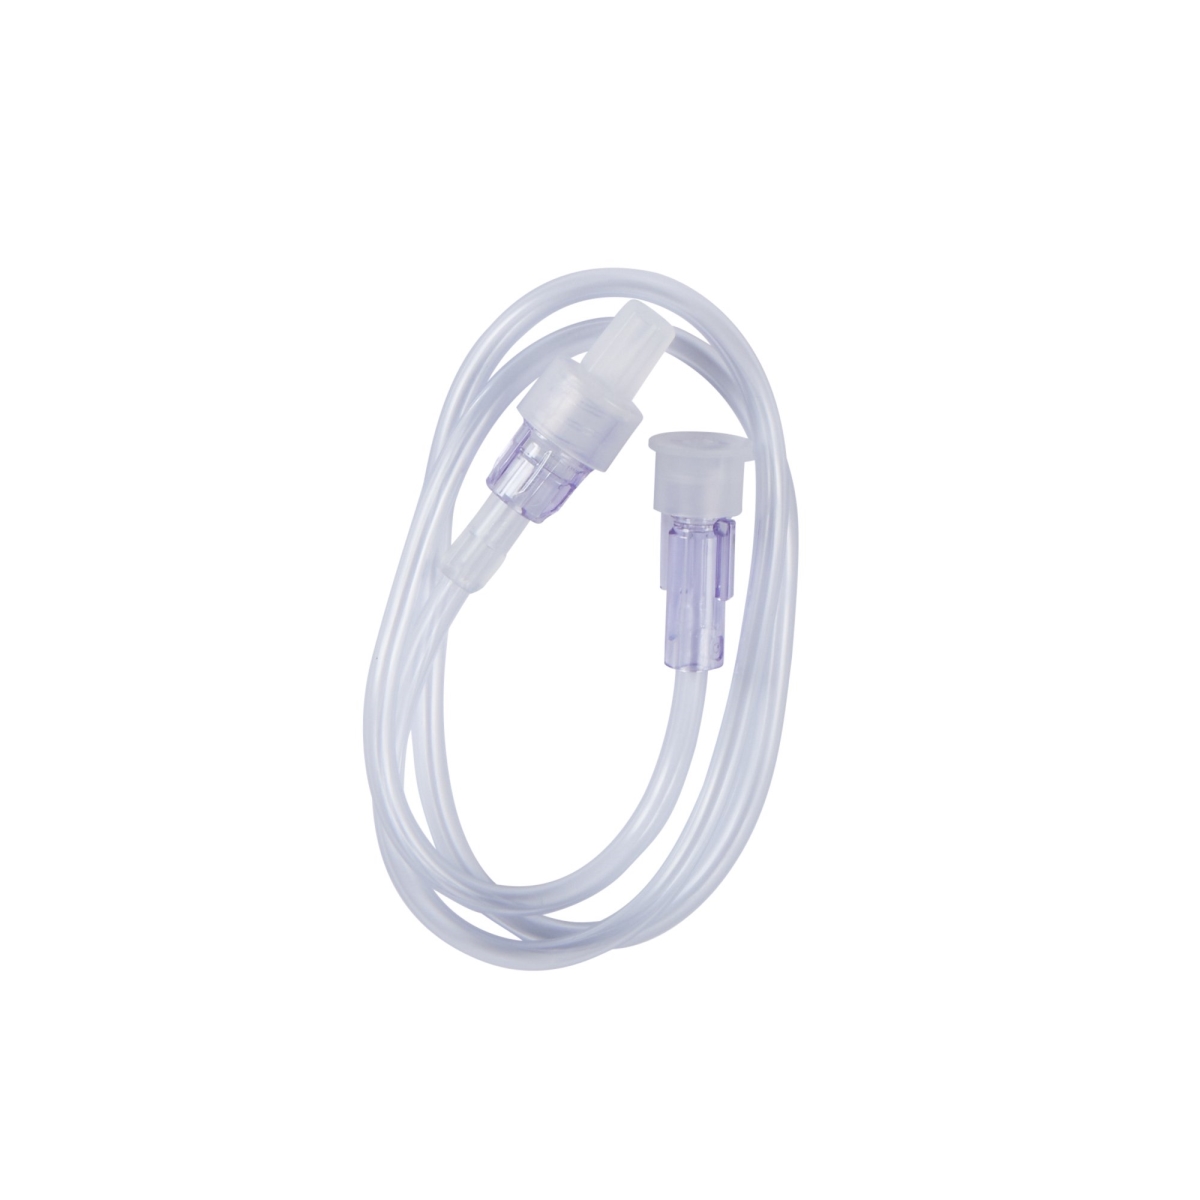 Picture of B. Braun 162069-EA 3 ml Priming Volume DEHP-Free Extension Set with 21 in. Tubing - Pack of 50